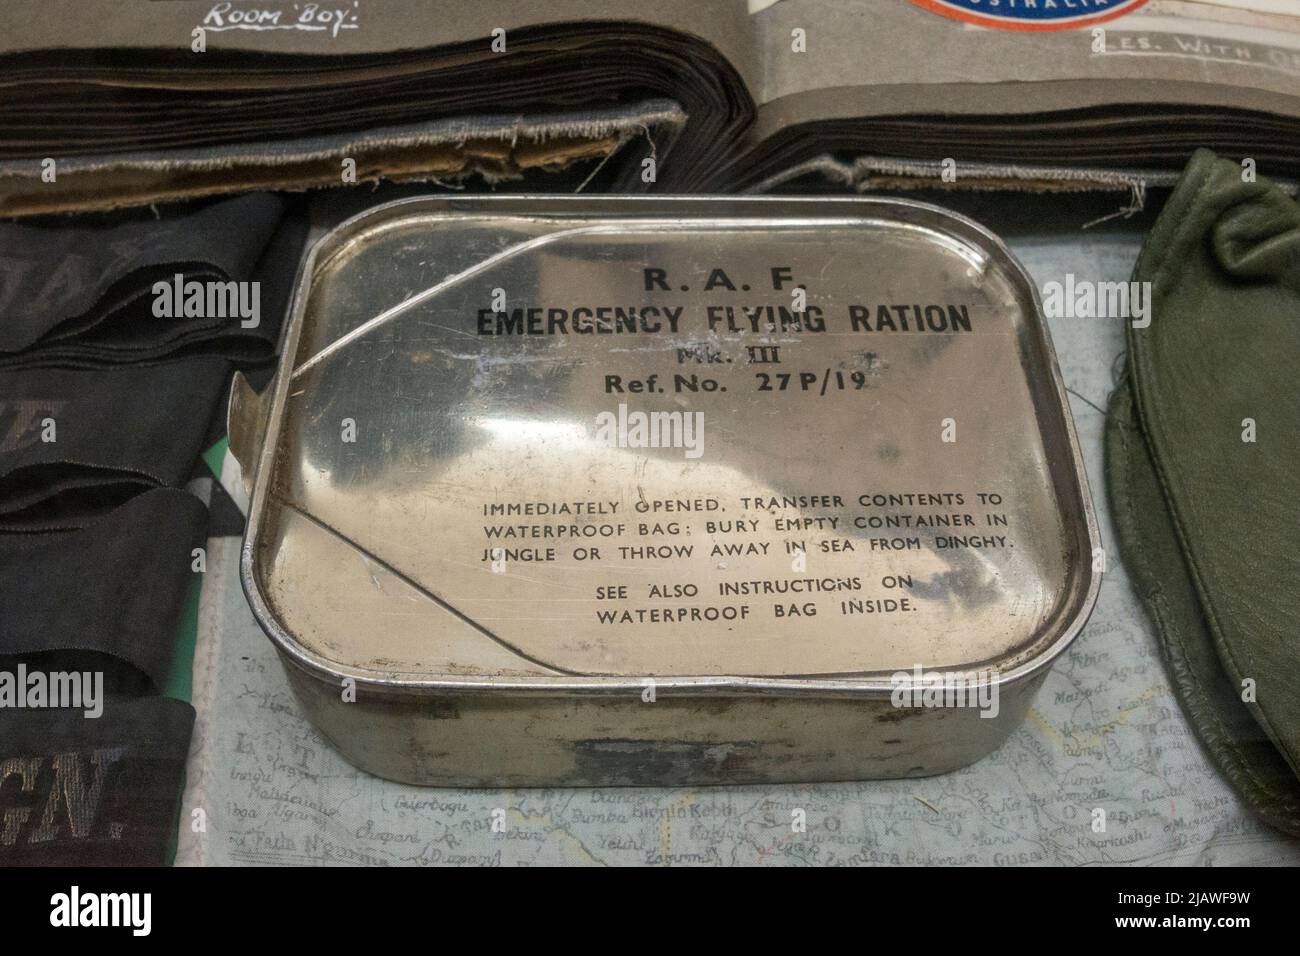 A RAF Emergency flying ration can in the Eden Camp Modern History Theme Museum near Malton, North Yorkshire, England. Stock Photo